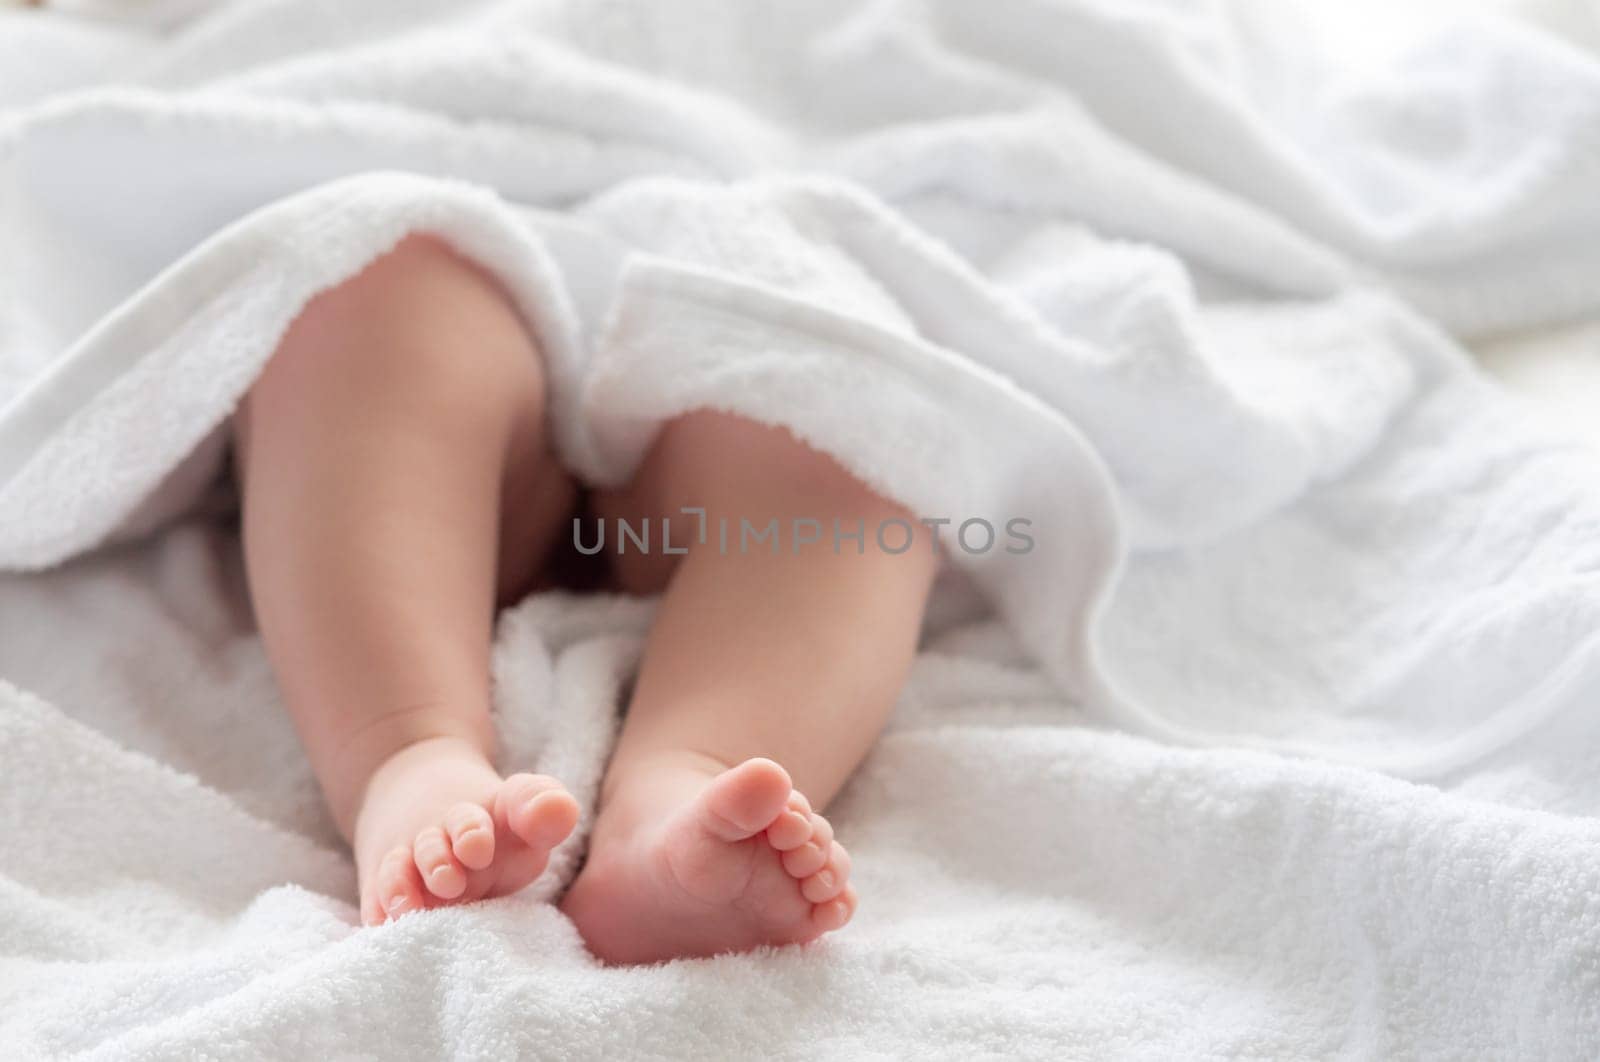 Infant child's tiny feet and legs appearing beneath the gentle cover of a soft white towel, showcasing post-bath serenity